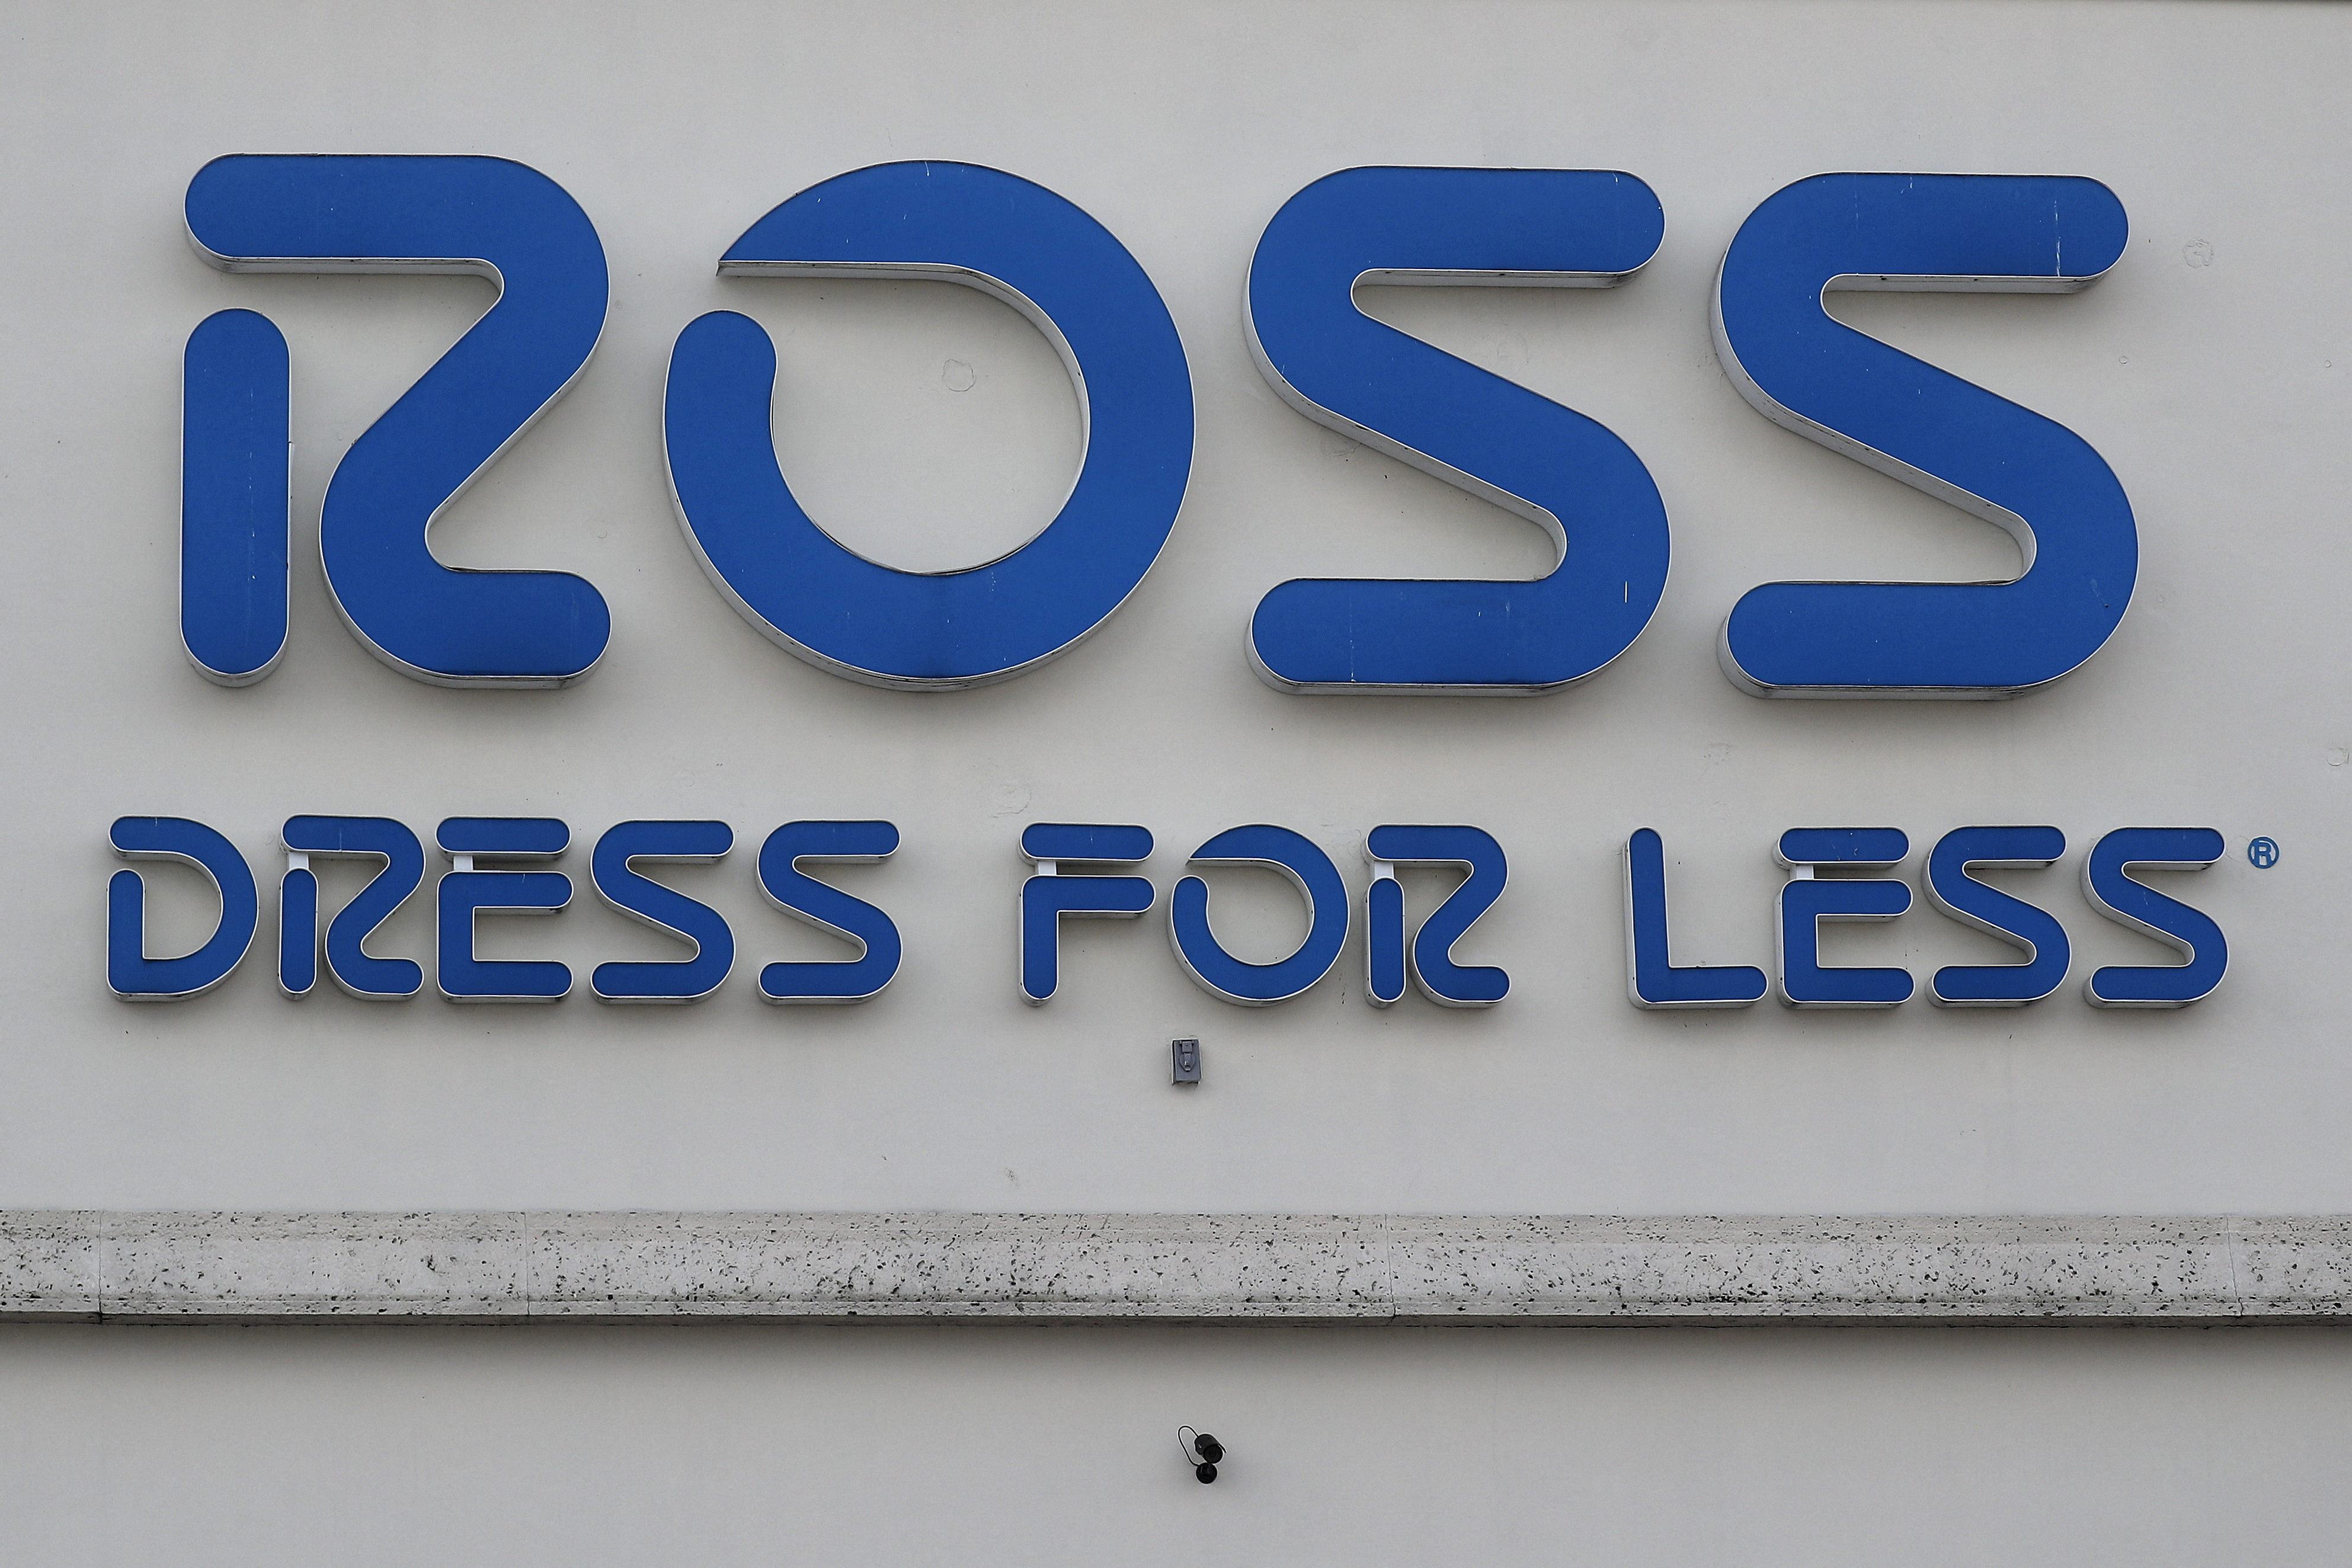 Ross Stores Near Me (Ross Dress For Less) [Updated April 2023